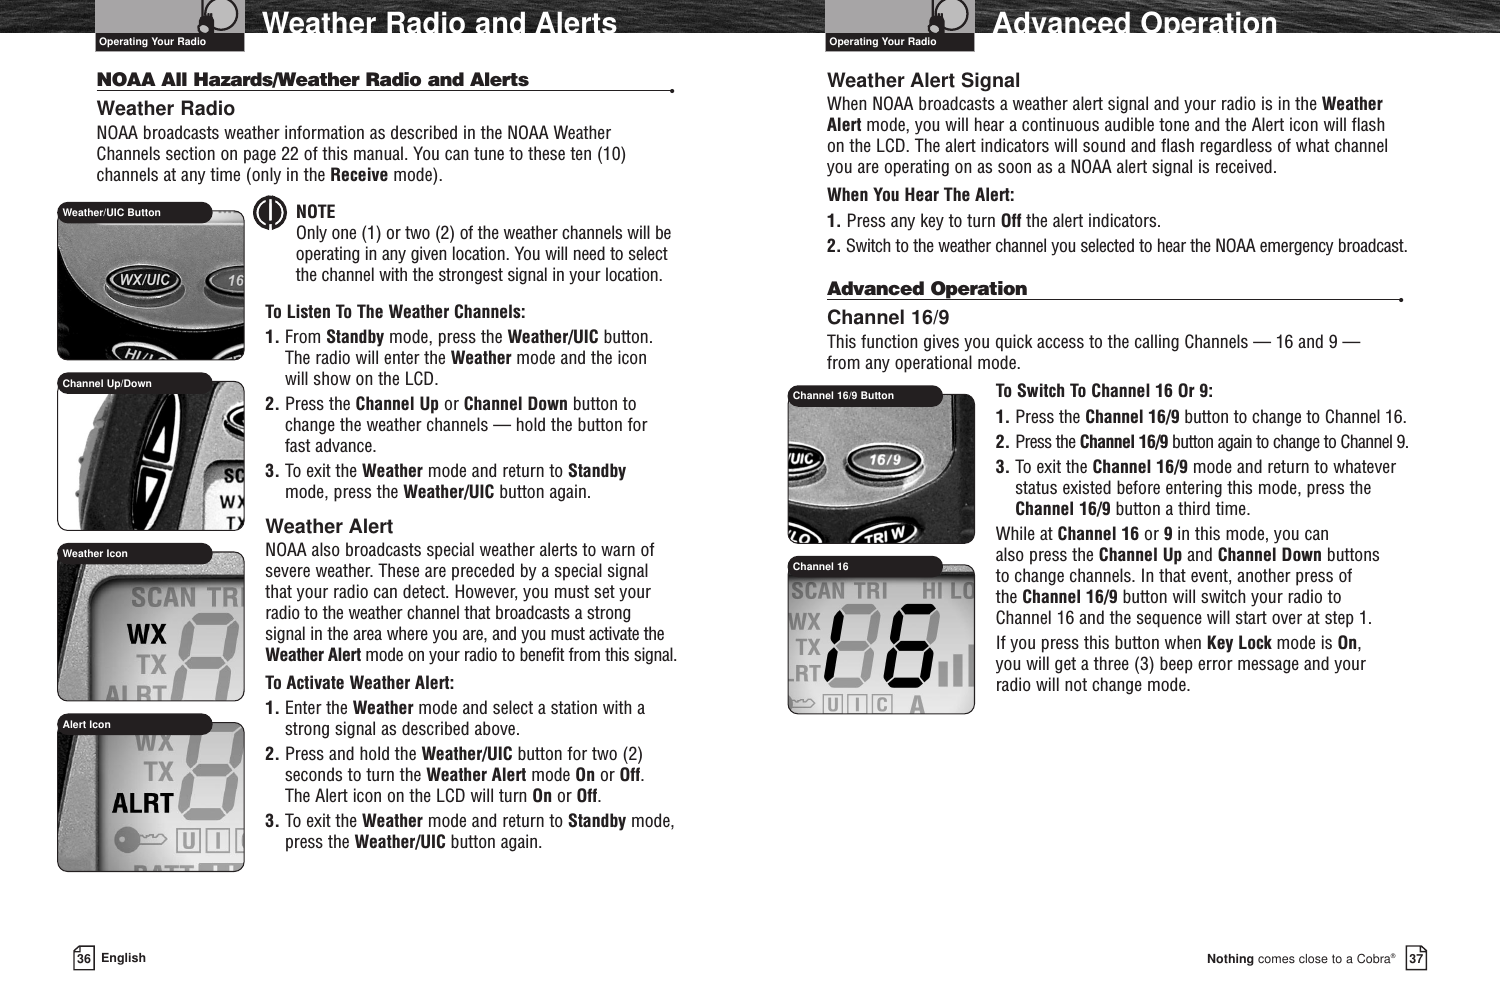 37Nothing comes close to a Cobra®36 EnglishWeather Radio and Alerts Advanced OperationNOAA All Hazards/Weather Radio and Alerts •Weather RadioNOAA broadcasts weather information as described in the NOAA Weather Channels section on page 22 of this manual. You can tune to these ten (10)channels at any time (only in the Receive mode).NOTE Only one (1) or two (2) of the weather channels will beoperating in any given location. You will need to select the channel with the strongest signal in your location.To Listen To The Weather Channels:1. From Standby mode, press the Weather/UIC button. The radio will enter the Weather mode and the icon will show on the LCD.2. Press the Channel Up or Channel Down button to change the weather channels — hold the button for fast advance.3. To exit the Weather mode and return to Standbymode, press the Weather/UIC button again.Weather AlertNOAA also broadcasts special weather alerts to warn ofsevere weather. These are preceded by a special signal that your radio can detect. However, you must set your radio to the weather channel that broadcasts a strong signal in the area where you are, and you must activate theWeather Alert mode on your radio to benefit from this signal.To Activate Weather Alert:1. Enter the Weather mode and select a station with astrong signal as described above.2. Press and hold the Weather/UIC button for two (2)seconds to turn the Weather Alert mode On or Off. The Alert icon on the LCD will turn On or Off.3. To exit the Weather mode and return to Standby mode,press the Weather/UIC button again.Weather Alert SignalWhen NOAA broadcasts a weather alert signal and your radio is in the Weather Alert mode, you will hear a continuous audible tone and the Alert icon will flash on the LCD. The alert indicators will sound and flash regardless of what channel you are operating on as soon as a NOAA alert signal is received.When You Hear The Alert:1. Press any key to turn Off the alert indicators.2. Switch to the weather channel you selected to hear the NOAA emergency broadcast.Advanced Operation •Channel 16/9This function gives you quick access to the calling Channels — 16 and 9 — from any operational mode.To Switch To Channel 16 Or 9:1. Press the Channel 16/9 button to change to Channel 16.2. Press the Channel 16/9 button again to change to Channel 9.3. To exit the Channel 16/9 mode and return to whateverstatus existed before entering this mode, press theChannel 16/9 button a third time.While at Channel 16 or 9in this mode, you can also press the Channel Up and Channel Down buttons to change channels. In that event, another press of the Channel 16/9 button will switch your radio to Channel 16 and the sequence will start over at step 1.If you press this button when Key Lock mode is On, you will get a three (3) beep error message and your radio will not change mode.Operating Your Radio Operating Your RadioChannel 16/9 ButtonChannel 16Channel Up/DownWeather/UIC ButtonWeather IconAlert Icon